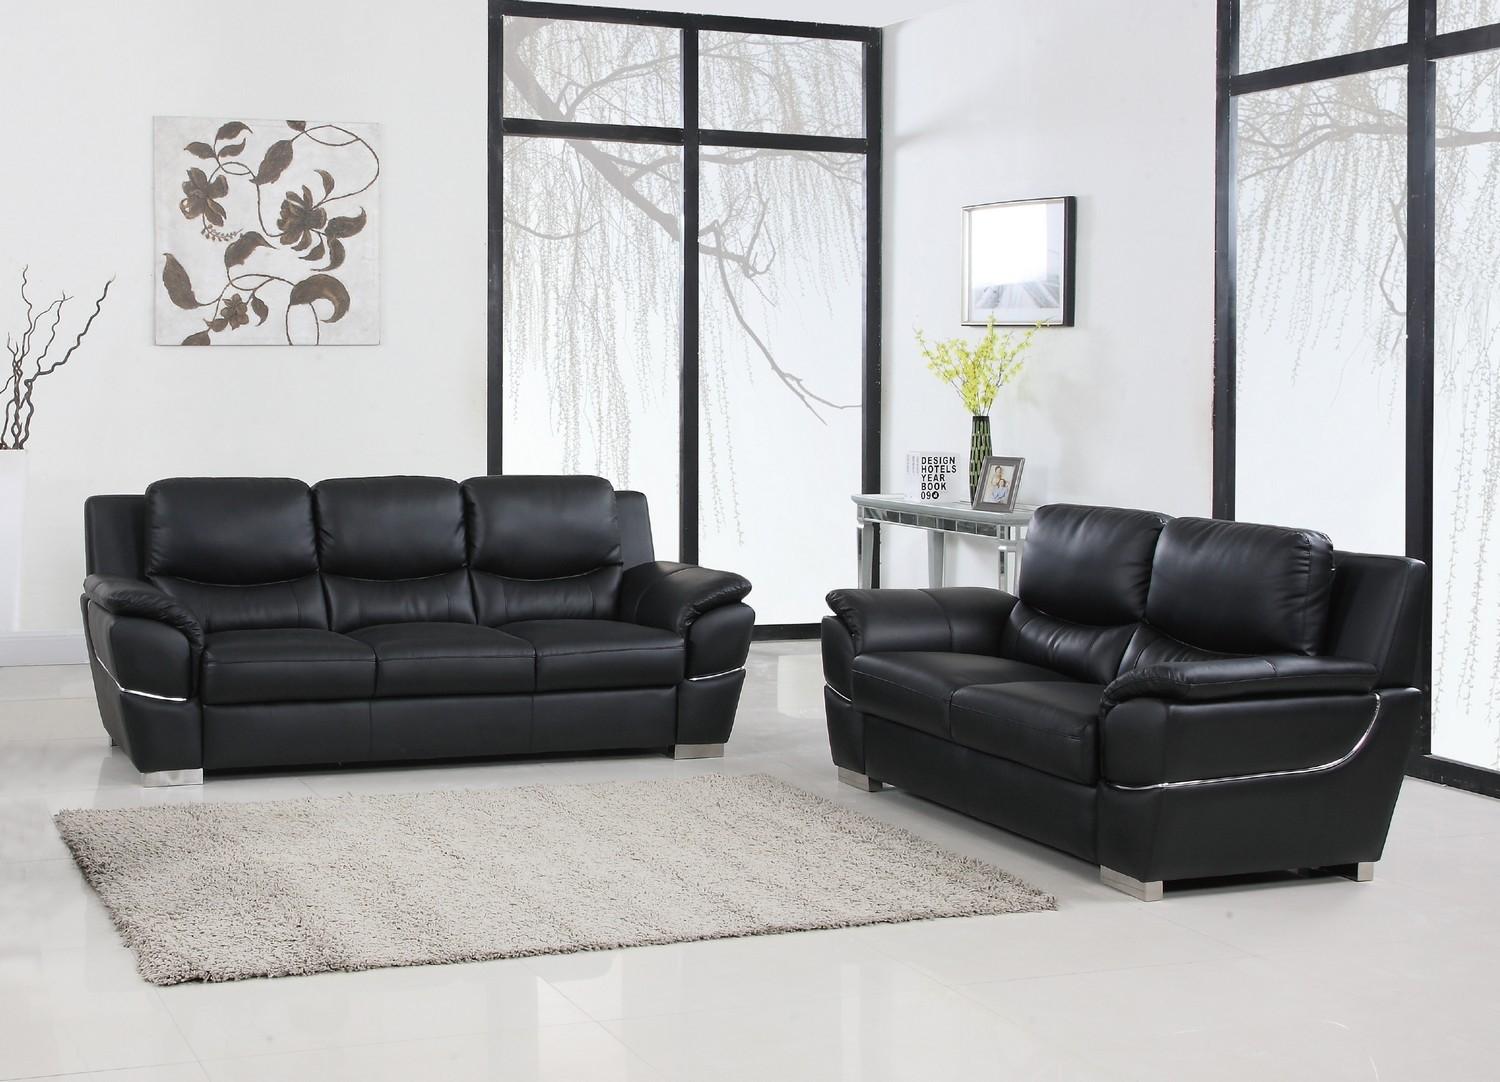 Contemporary Sofa and Loveseat Set 4572 4572-BLACK-2PC in Black Leather gel match